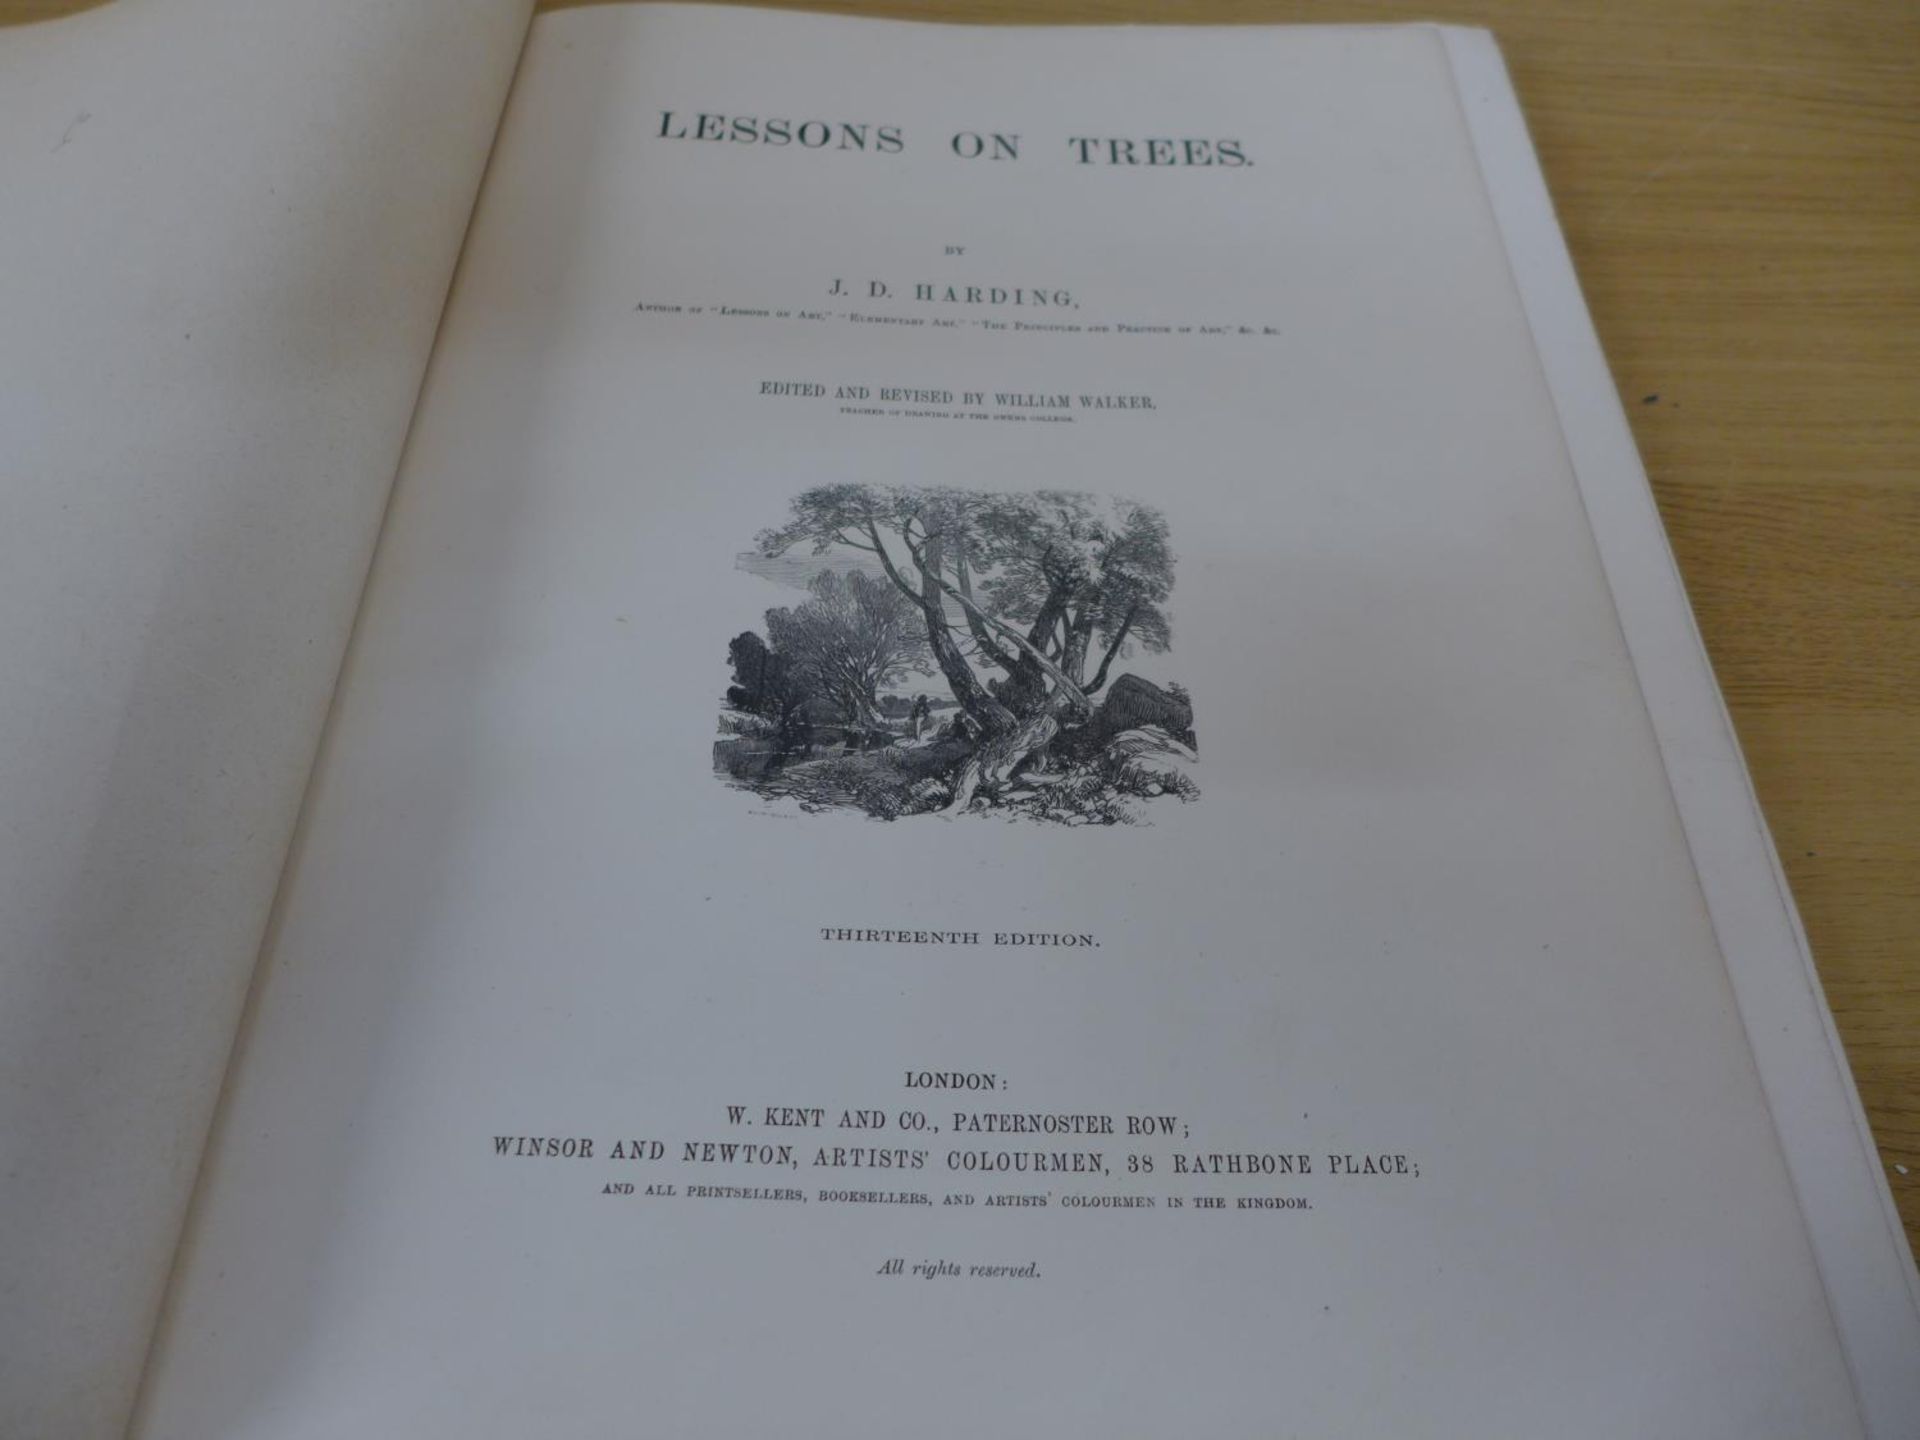 J.D. HARDING 'LESSONS ON TREES' PUBLISHED BY W. KENT & CO, LONDON CIRCA 1879 - Image 3 of 5